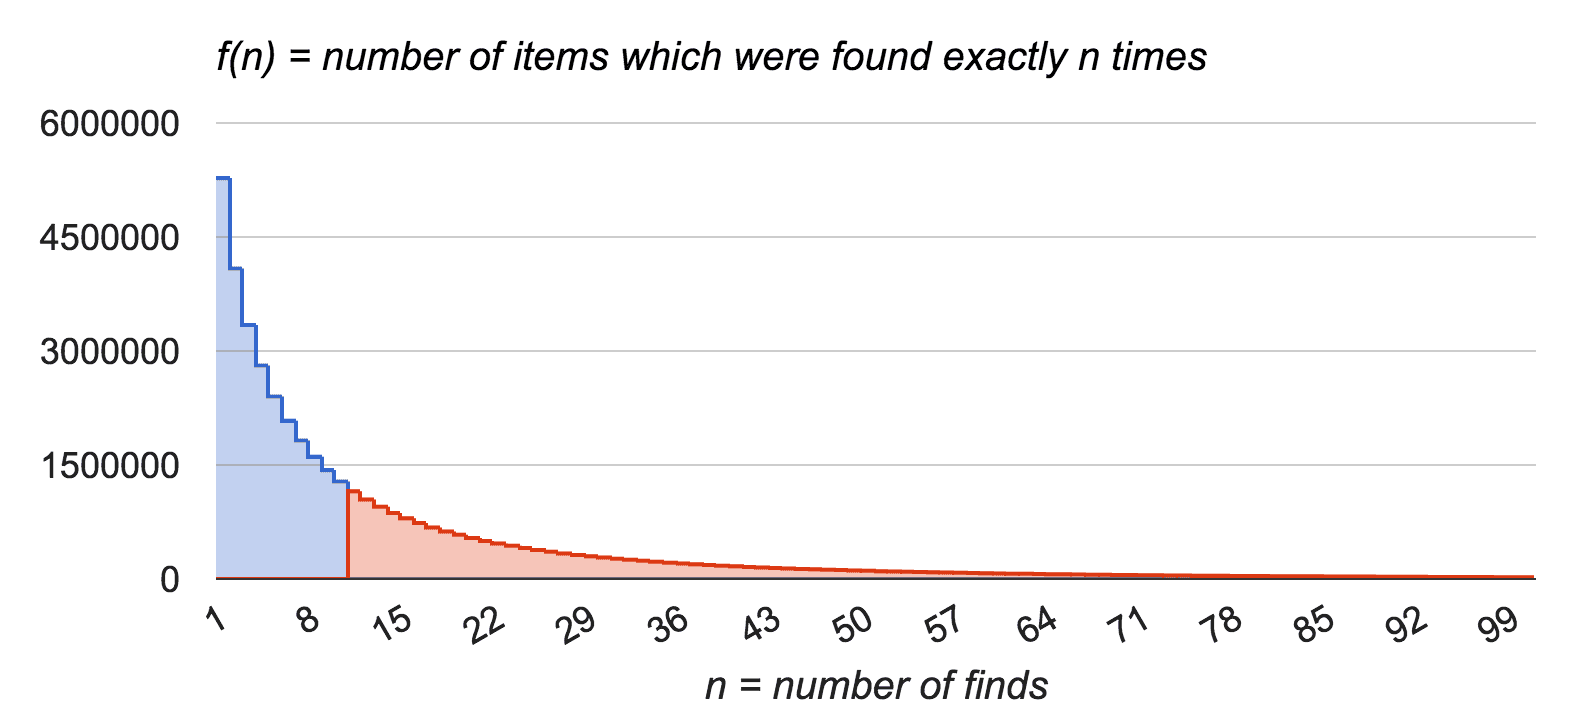 Items count as a function of finds count